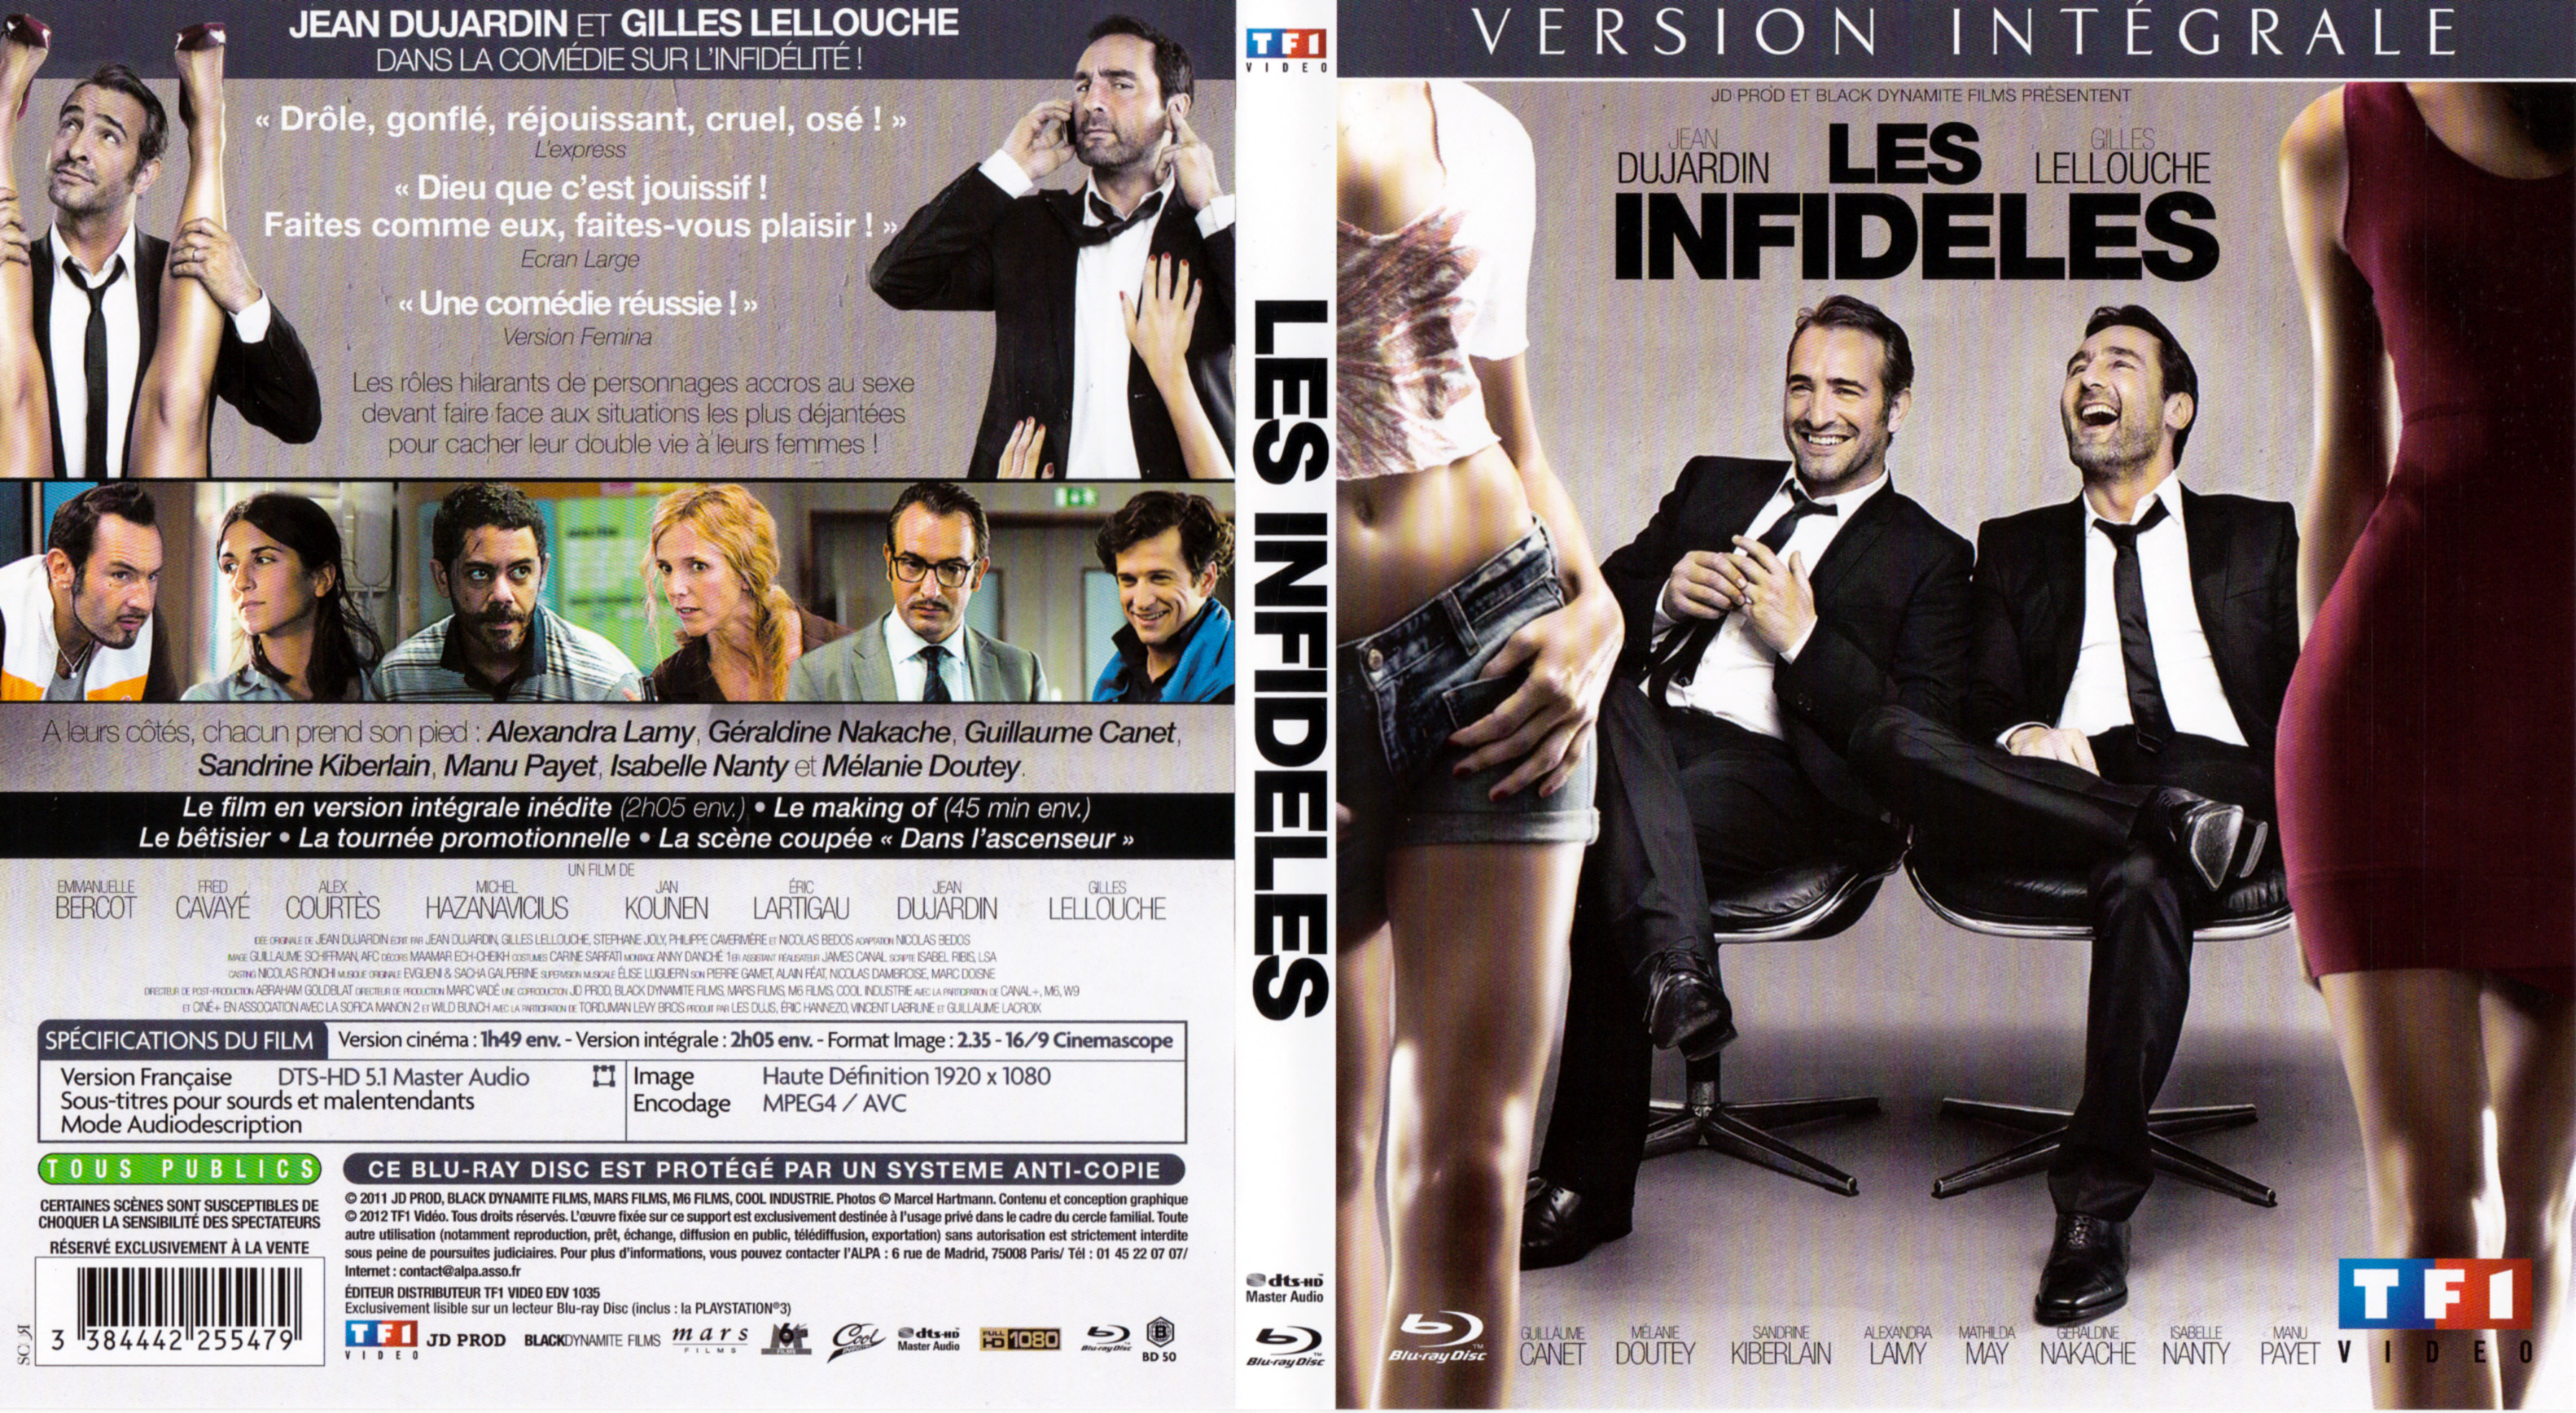 Jaquette DVD Les infidles (BLU-RAY)